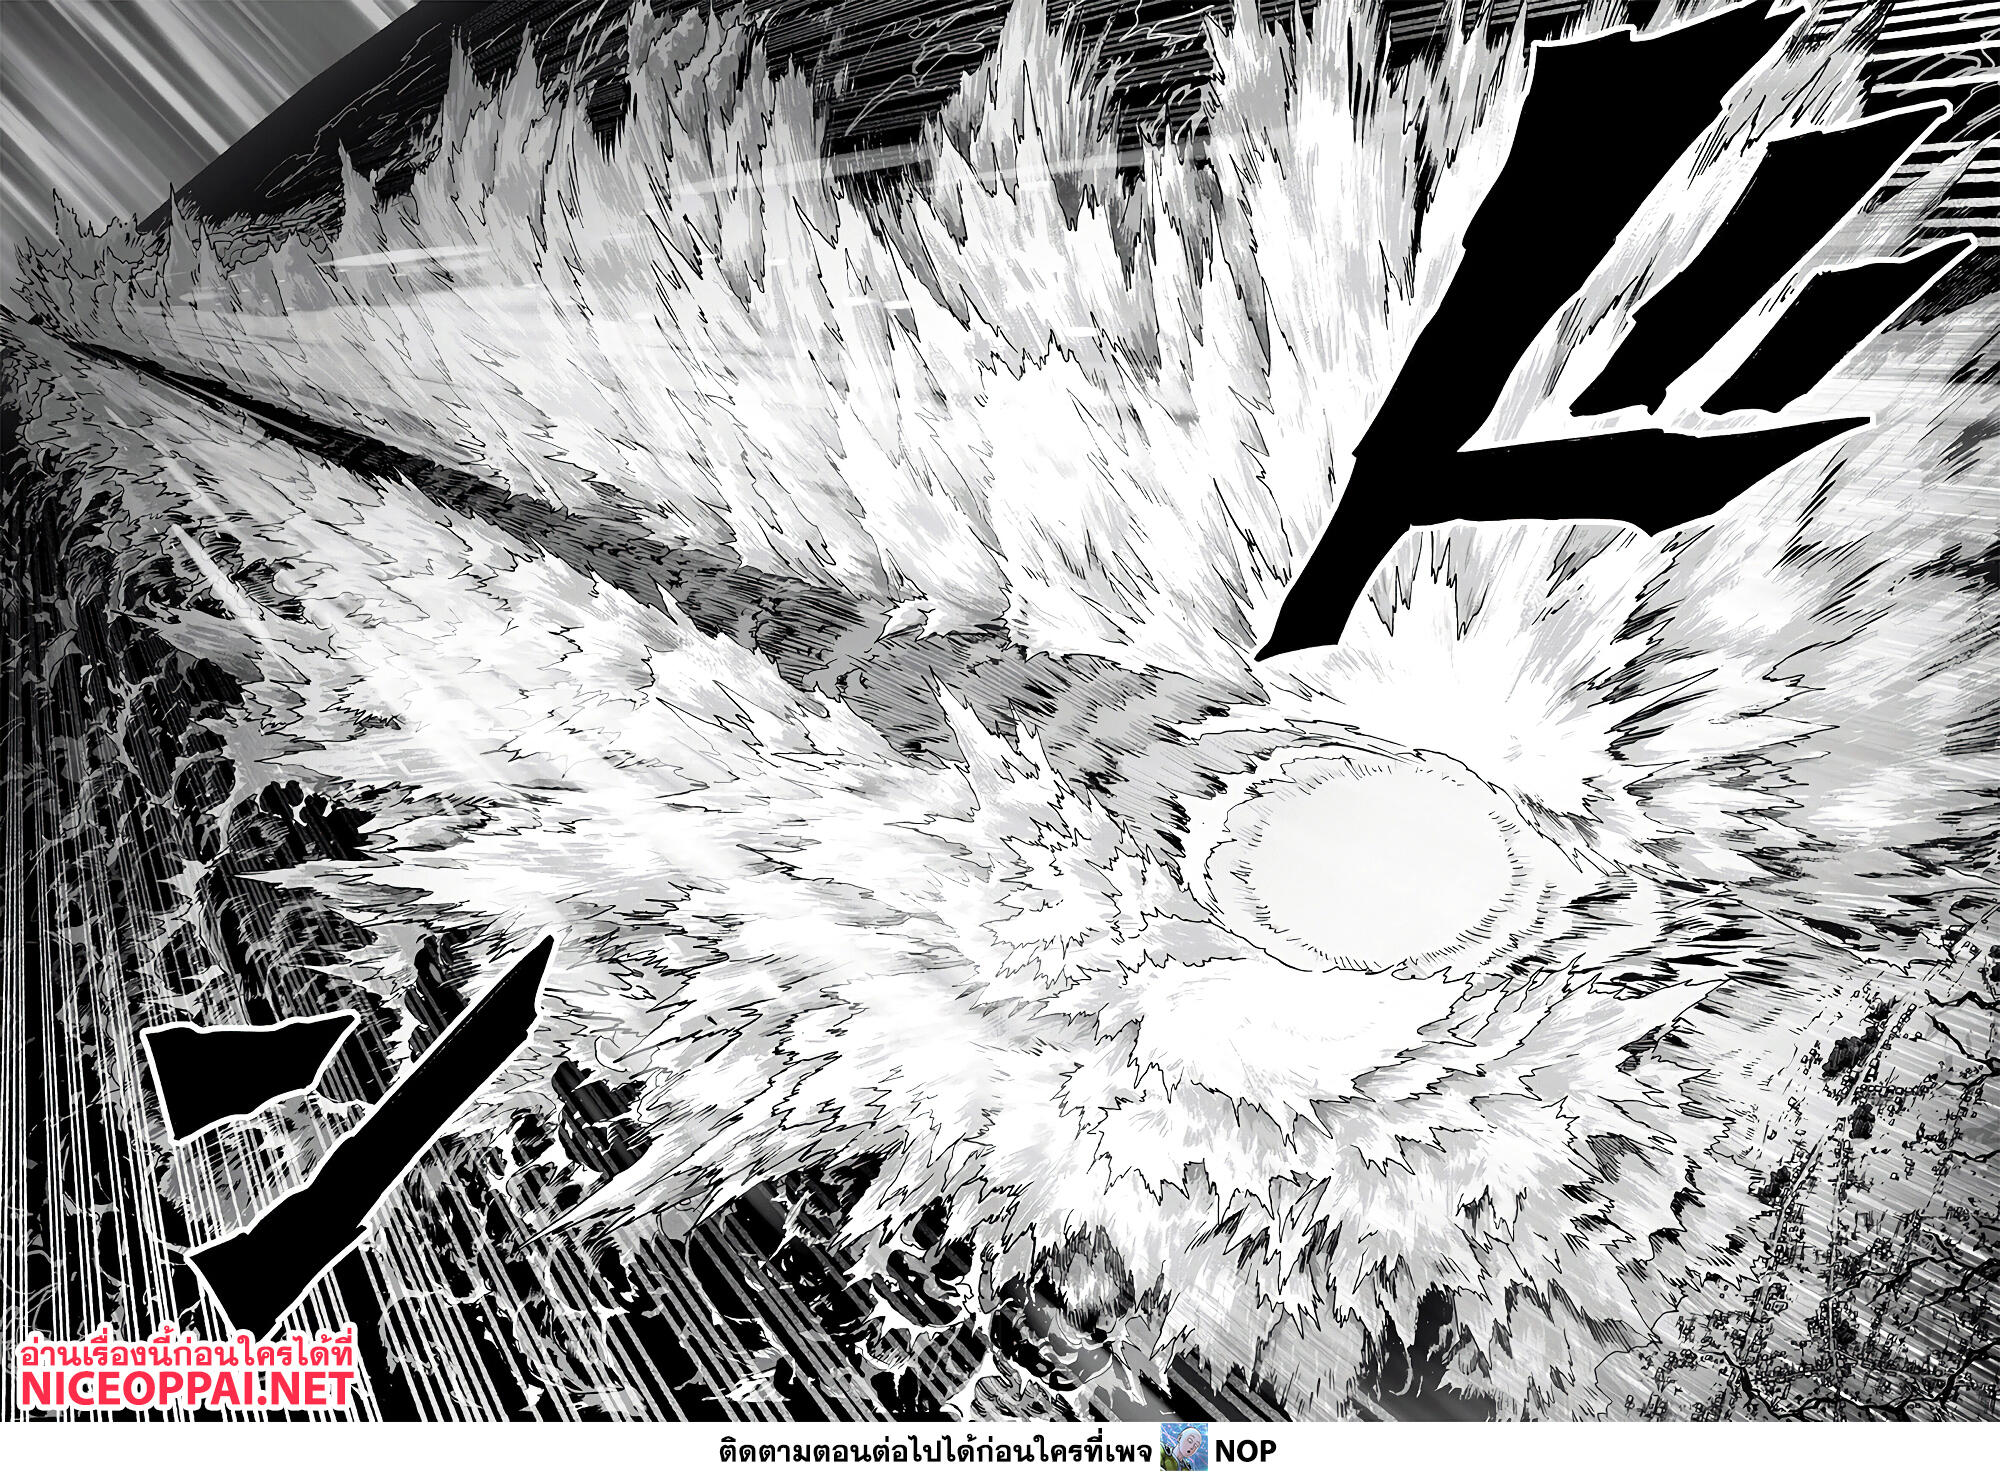 One Punch Man 157 TH